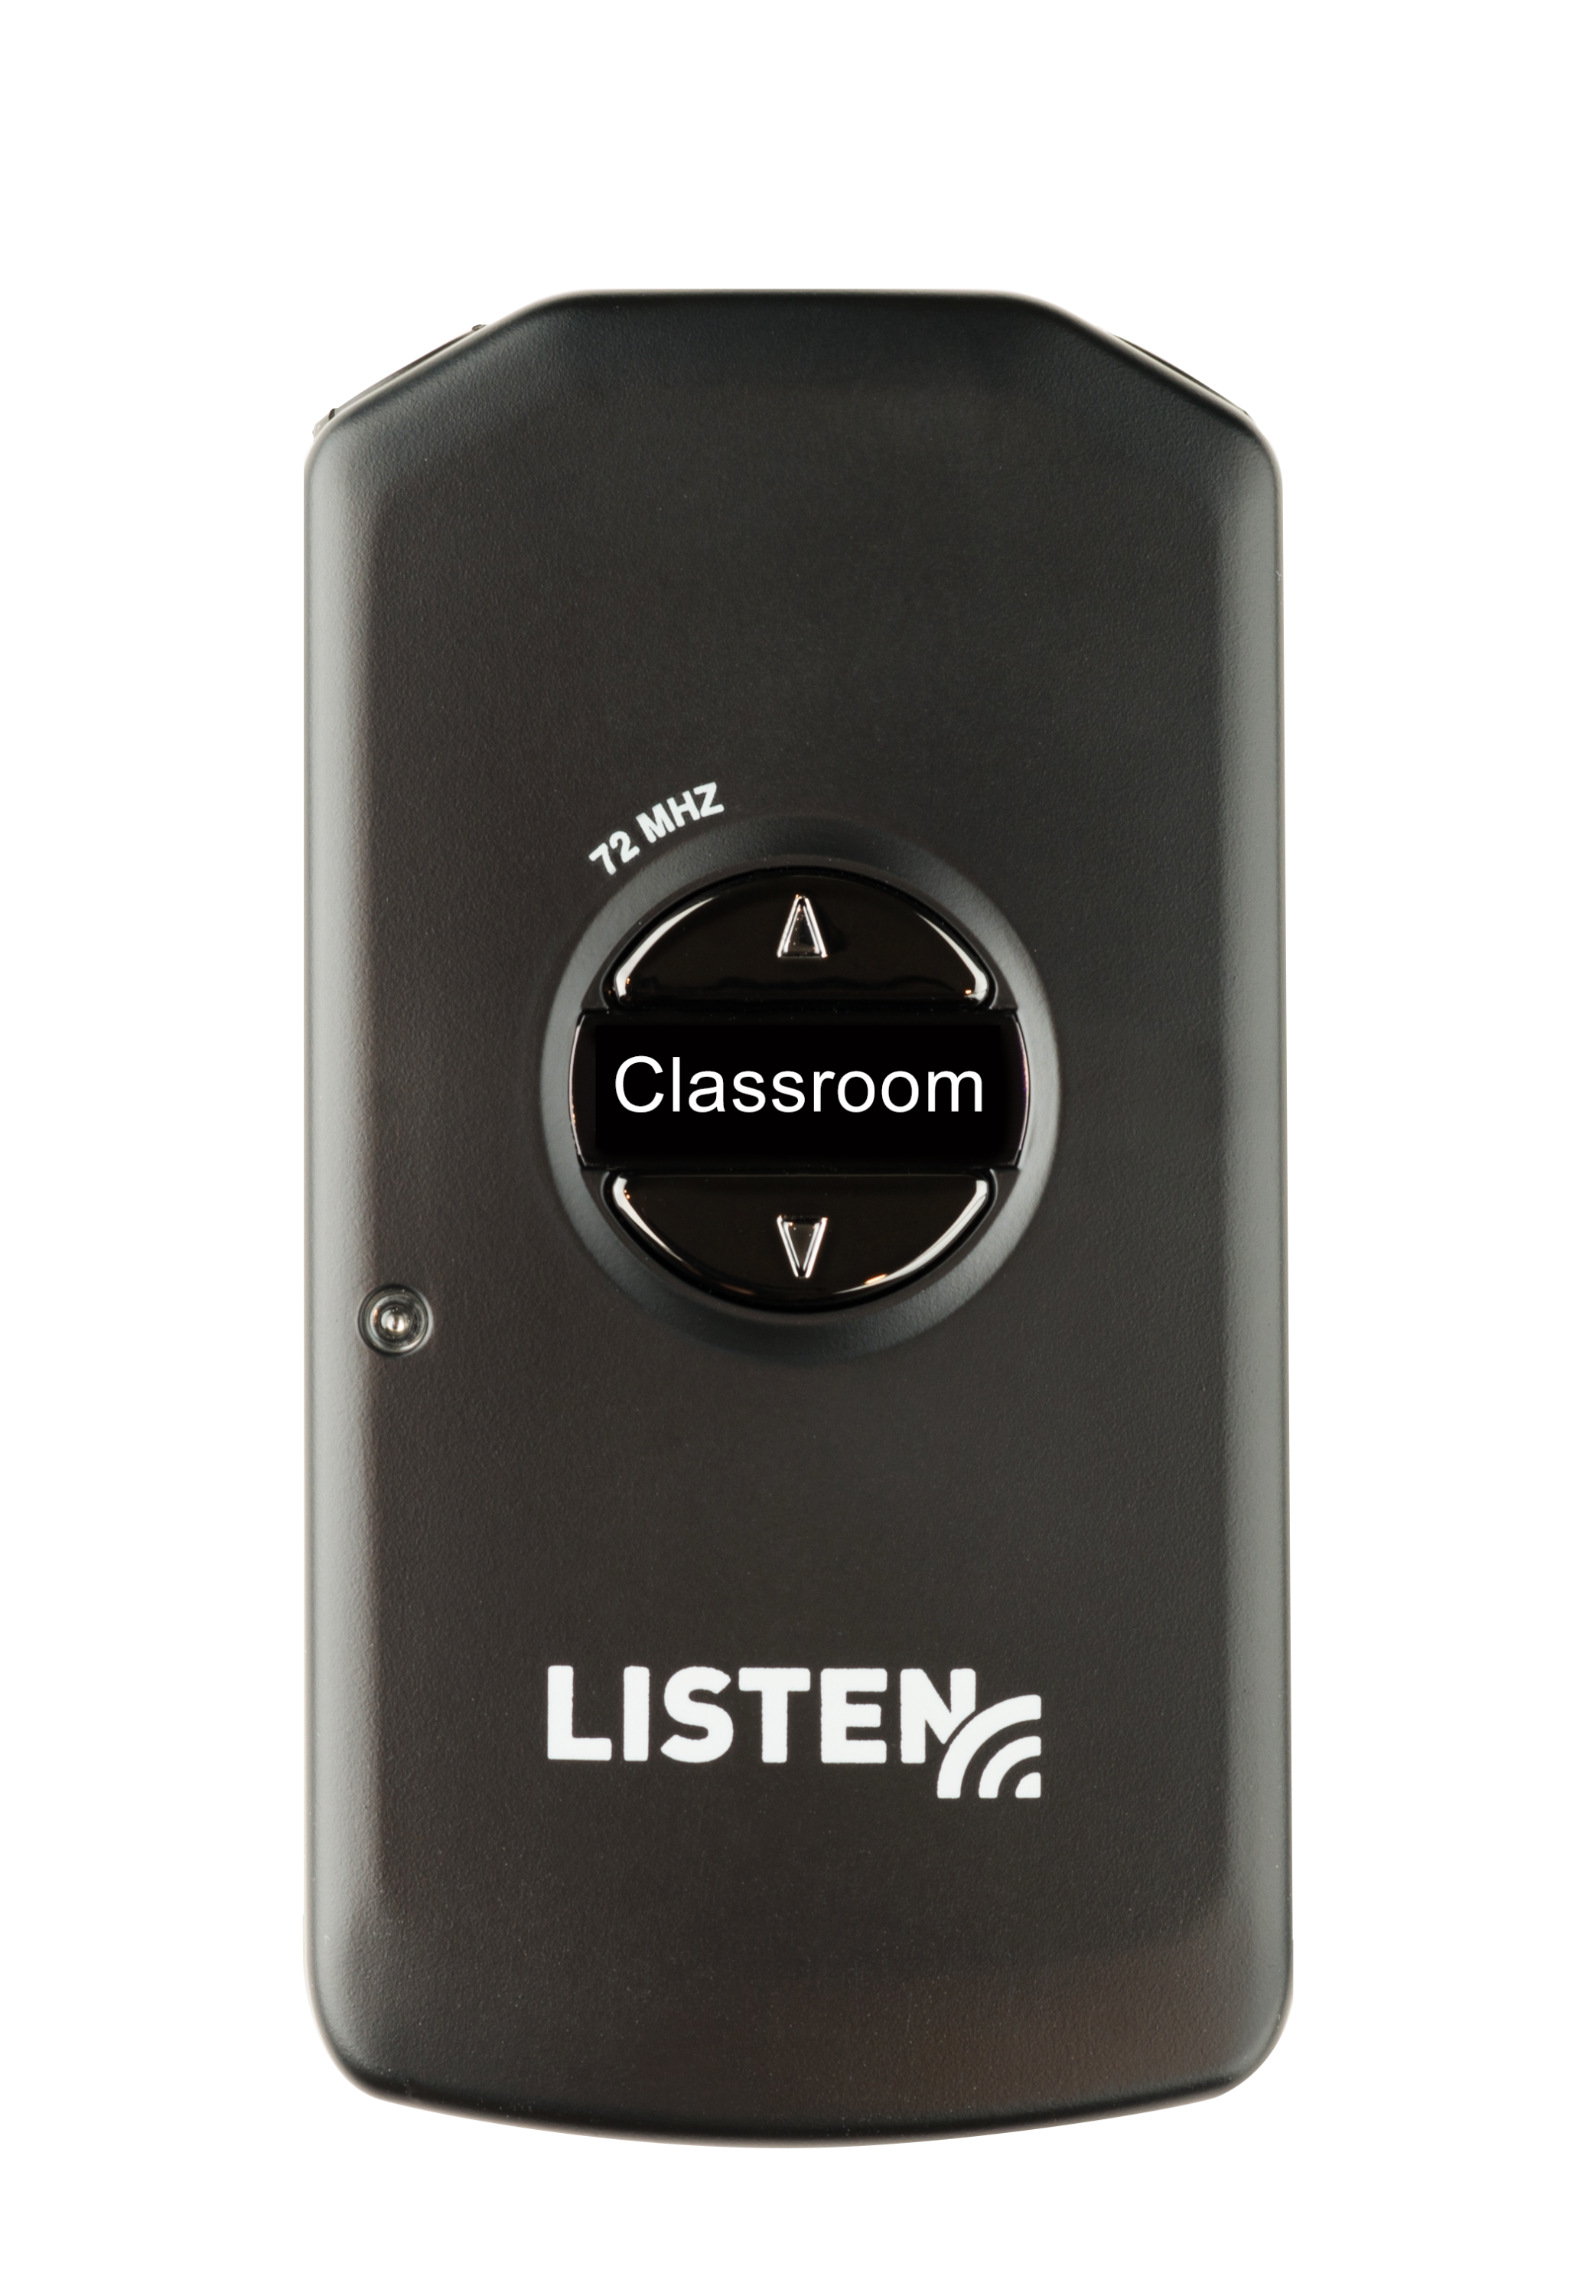 Wireless remote control for ALL my classroom lights! It's saves SO muc